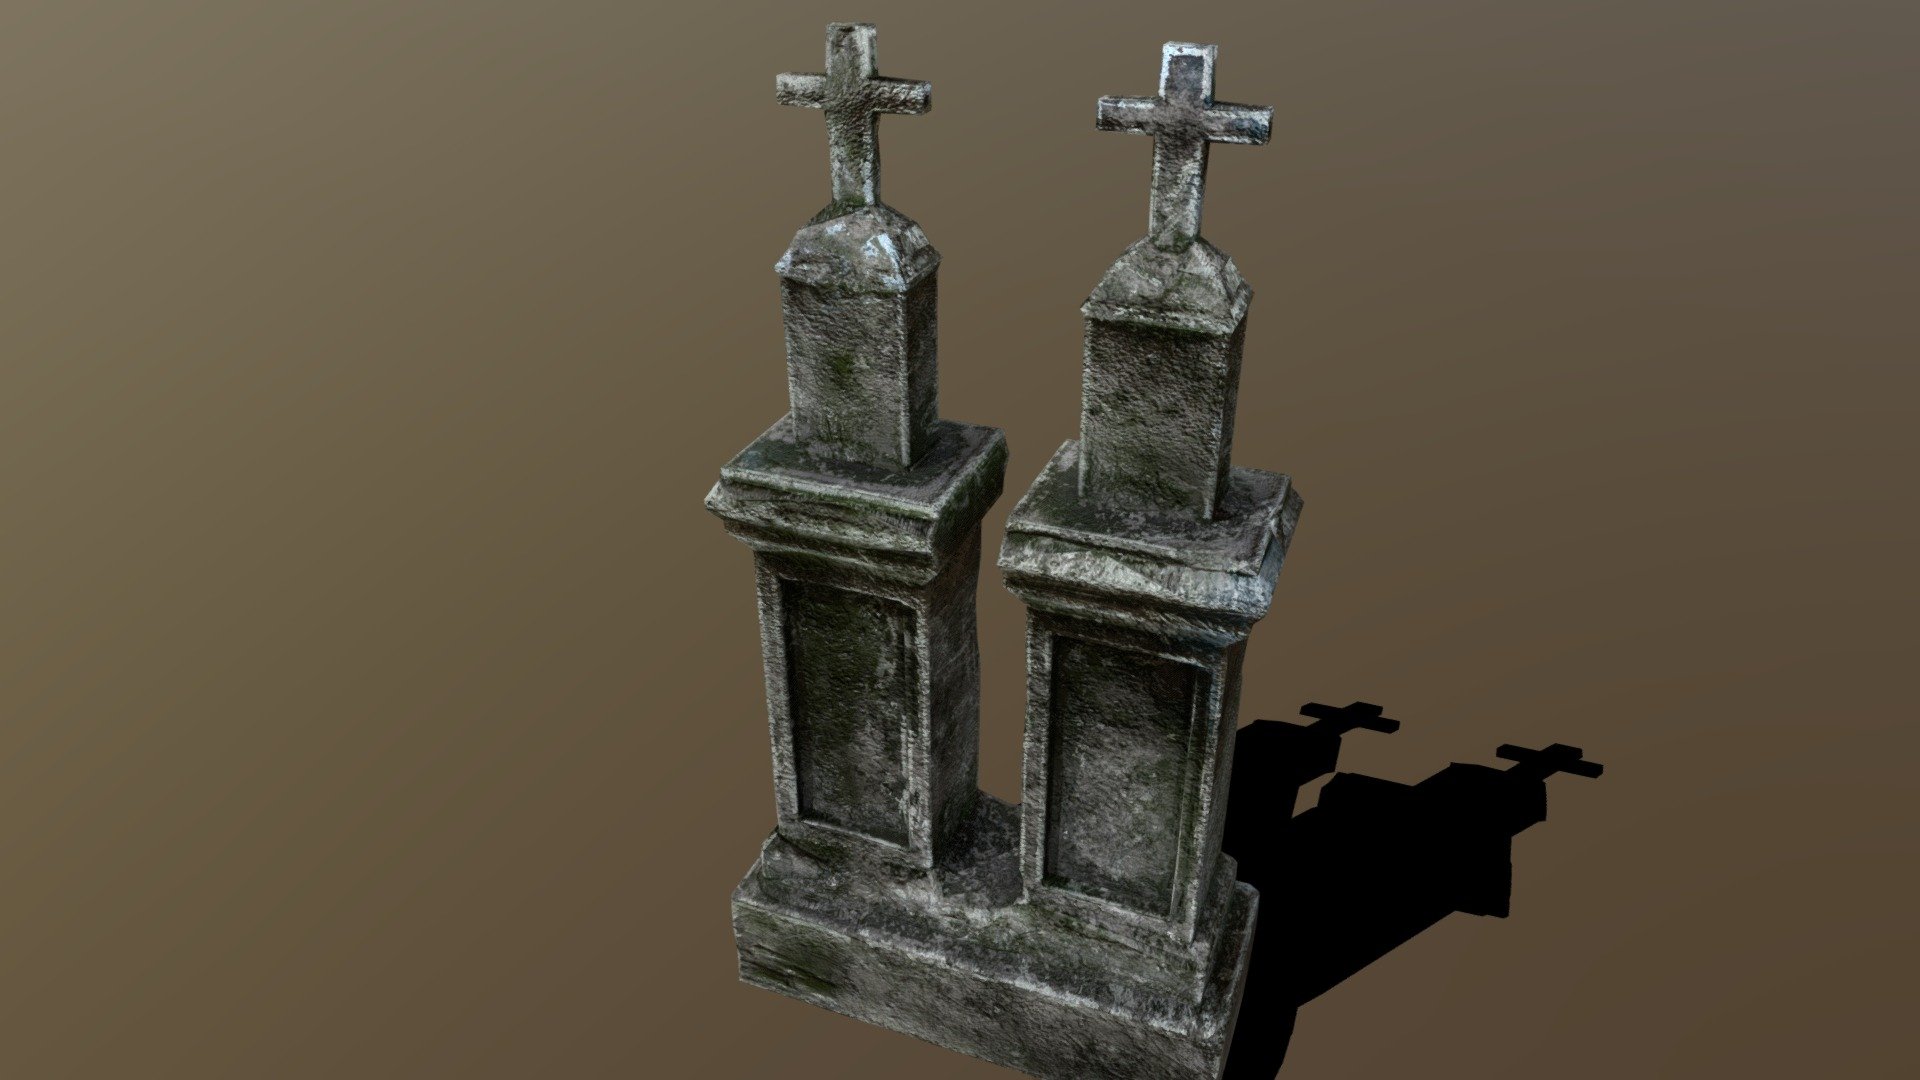 FBX Model
2K Textures
Lowe Poly - Tombstone (Game Ready) - 3D model by Sculpting Tools (@InterFox) 3d model